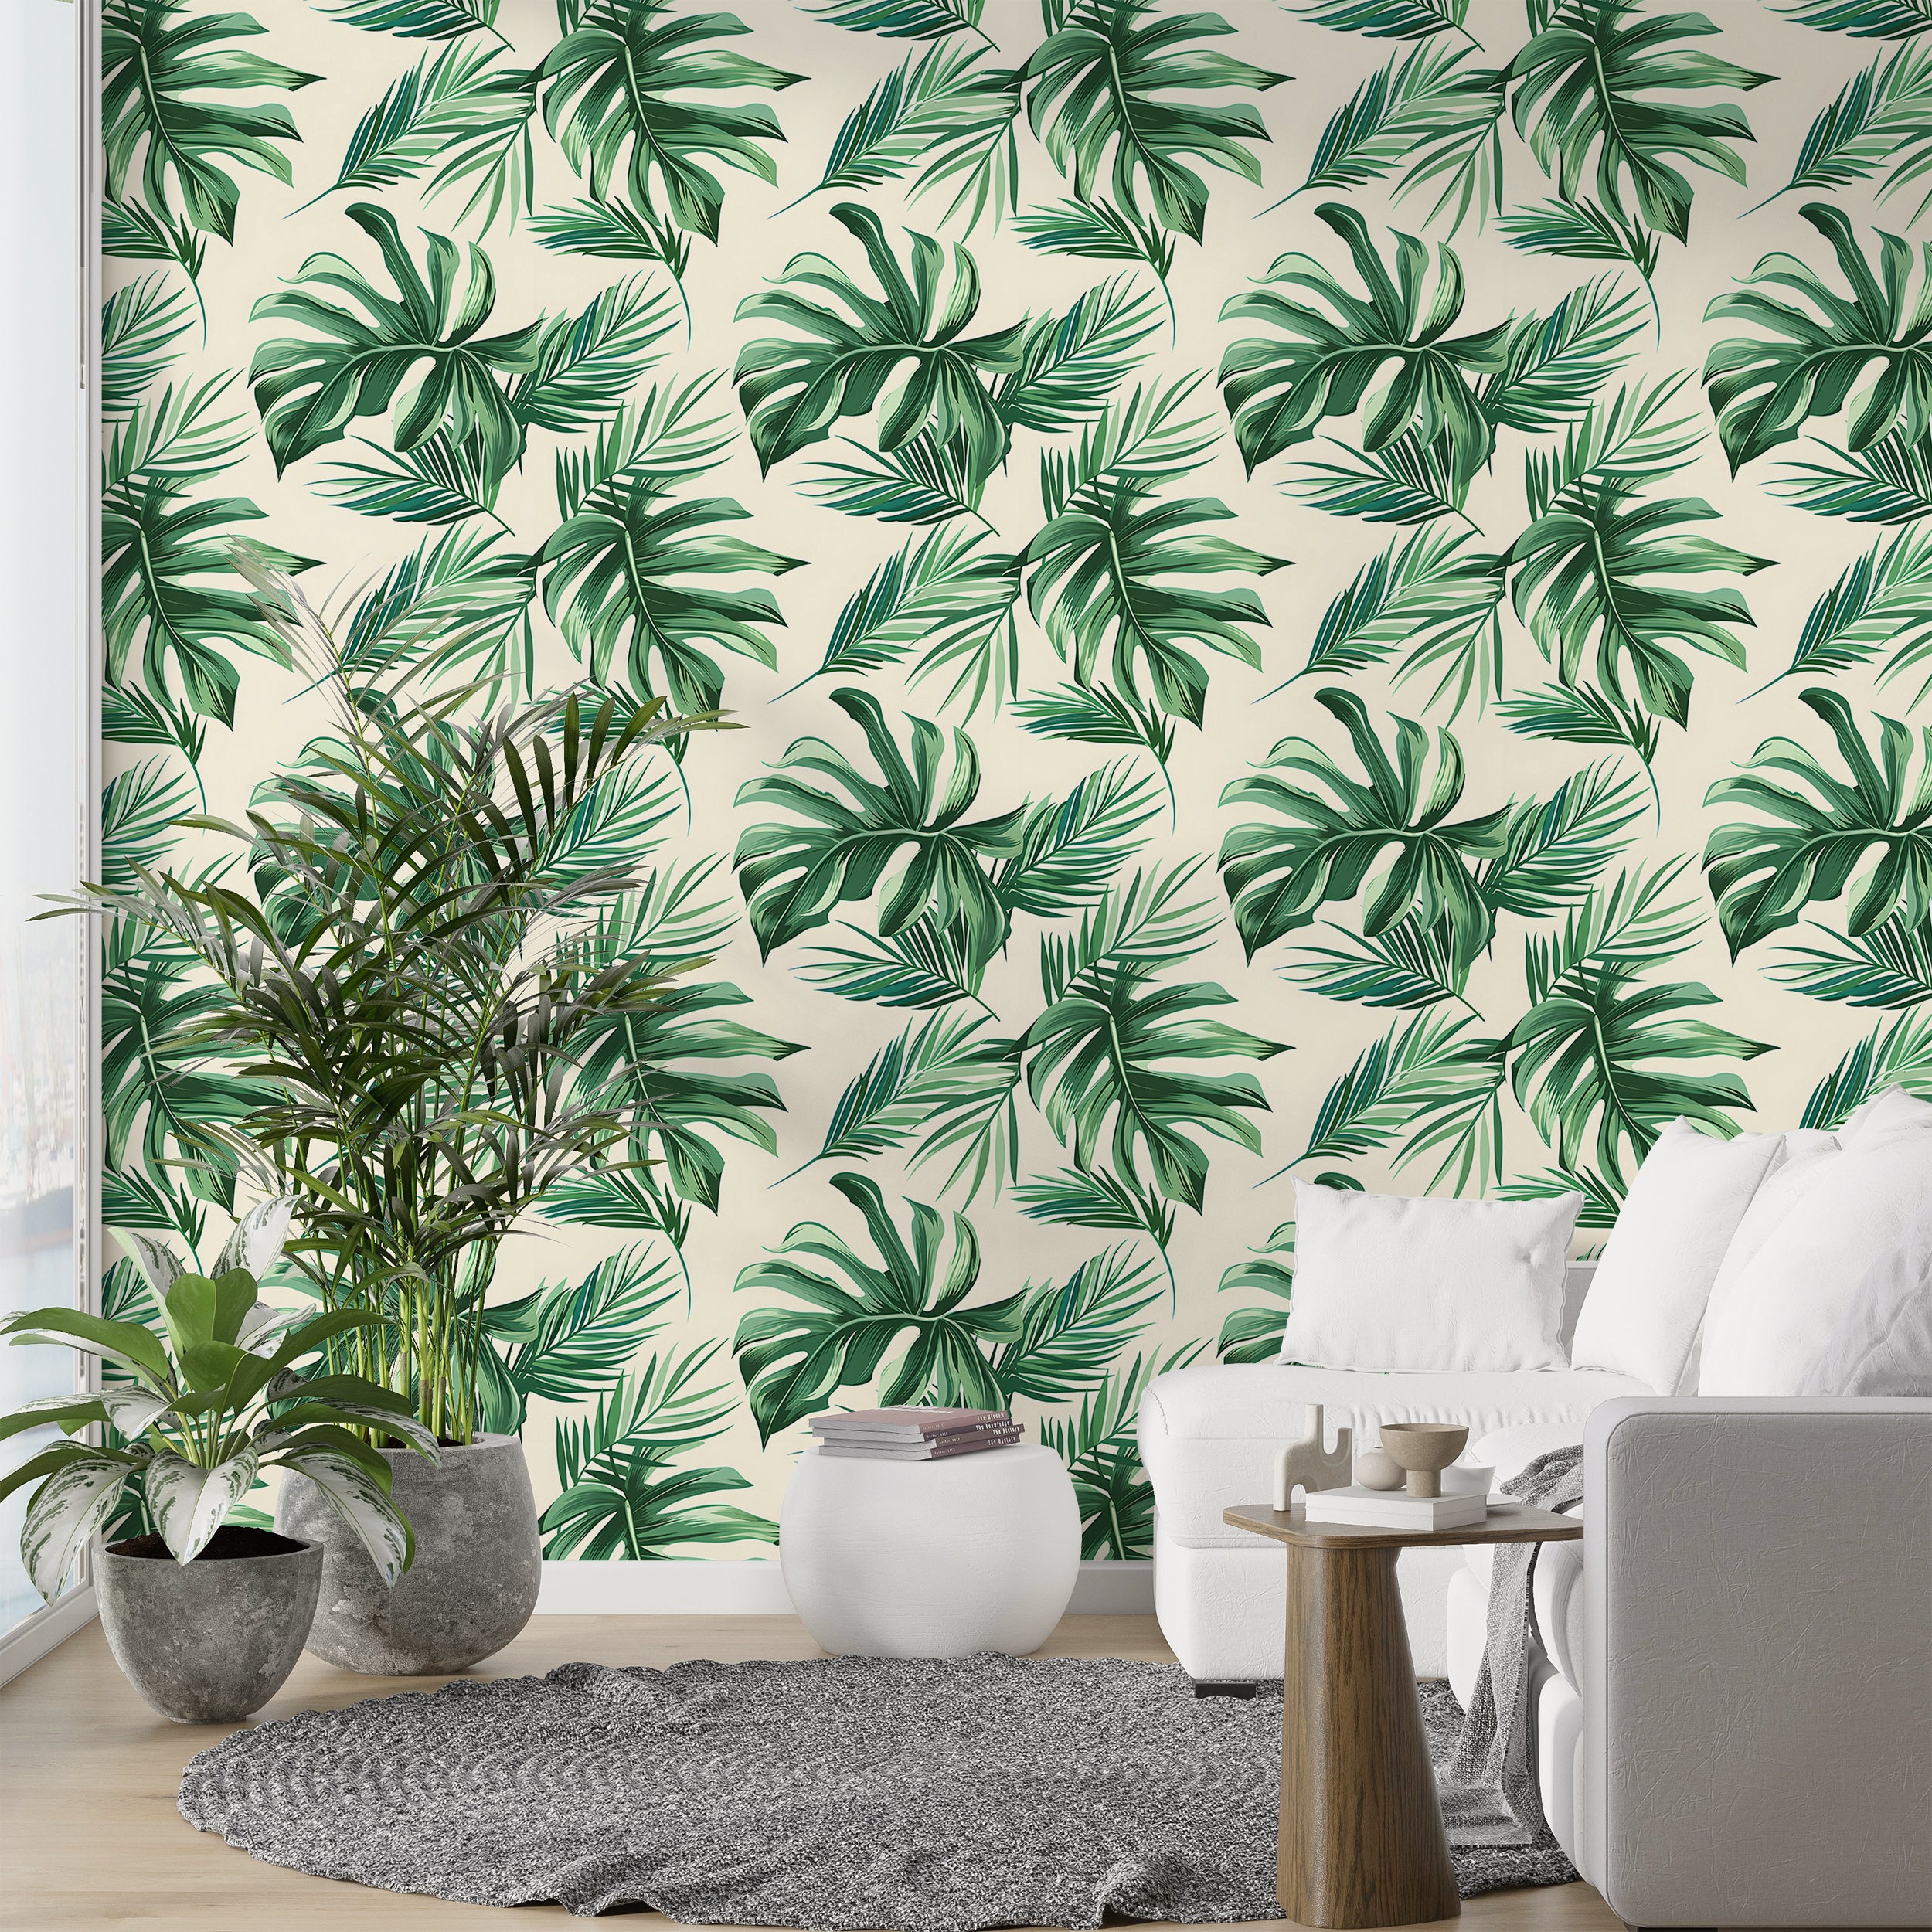 Palm Leaves Wallpaper, Green and Beige Tropical Wall Decal, Peel and Stick Palms Wallpaper, Removable Jungle Floral Wall Decor